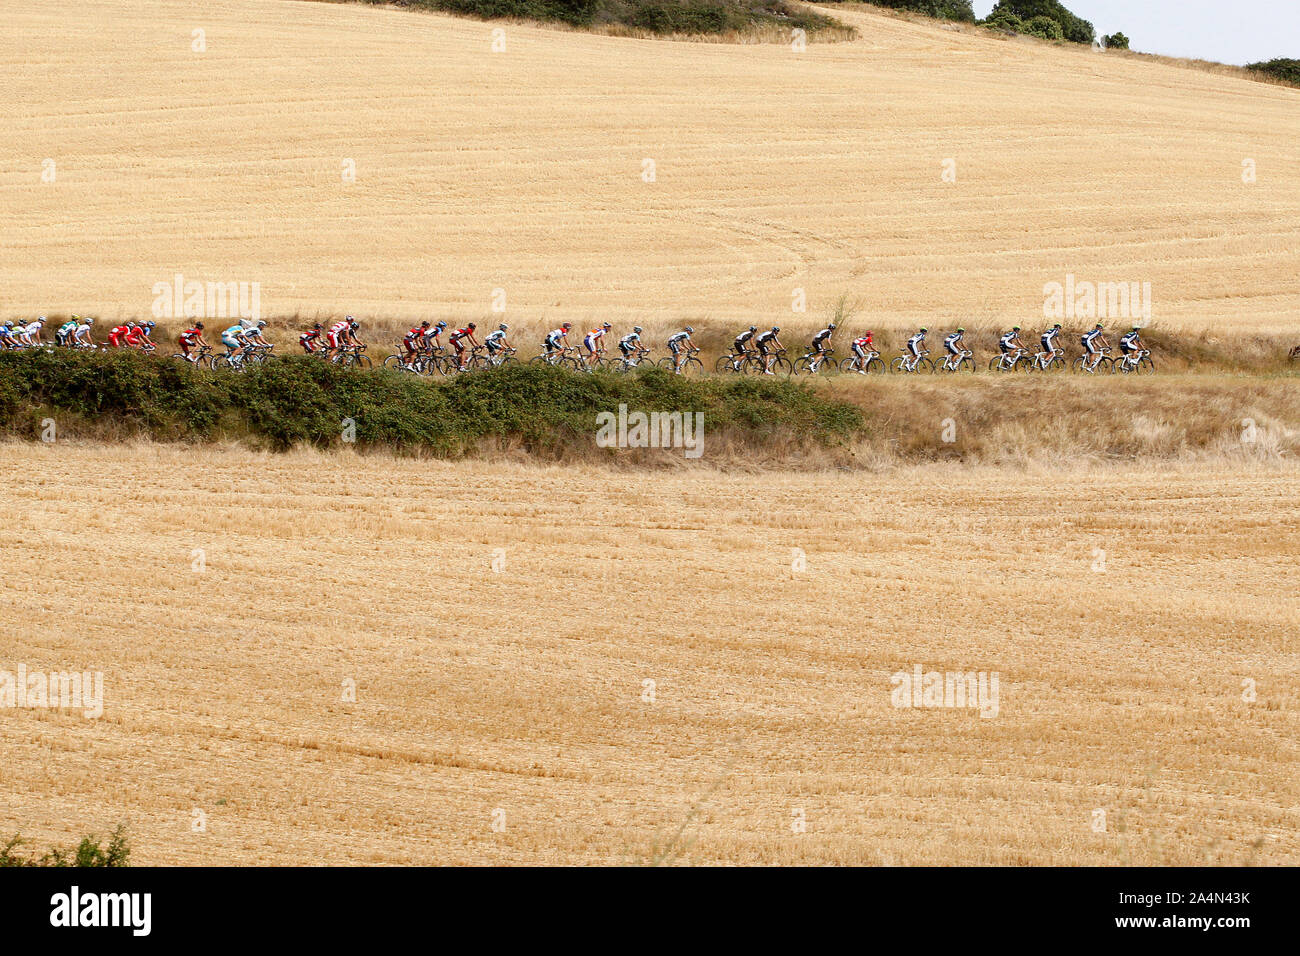 The group during the stage of La Vuelta 2012 between Faustino V and Eibar (Arrate).August 20,2012. (ALTERPHOTOS/Paola Otero) /NortePhoto.com   **CREDI Stock Photo